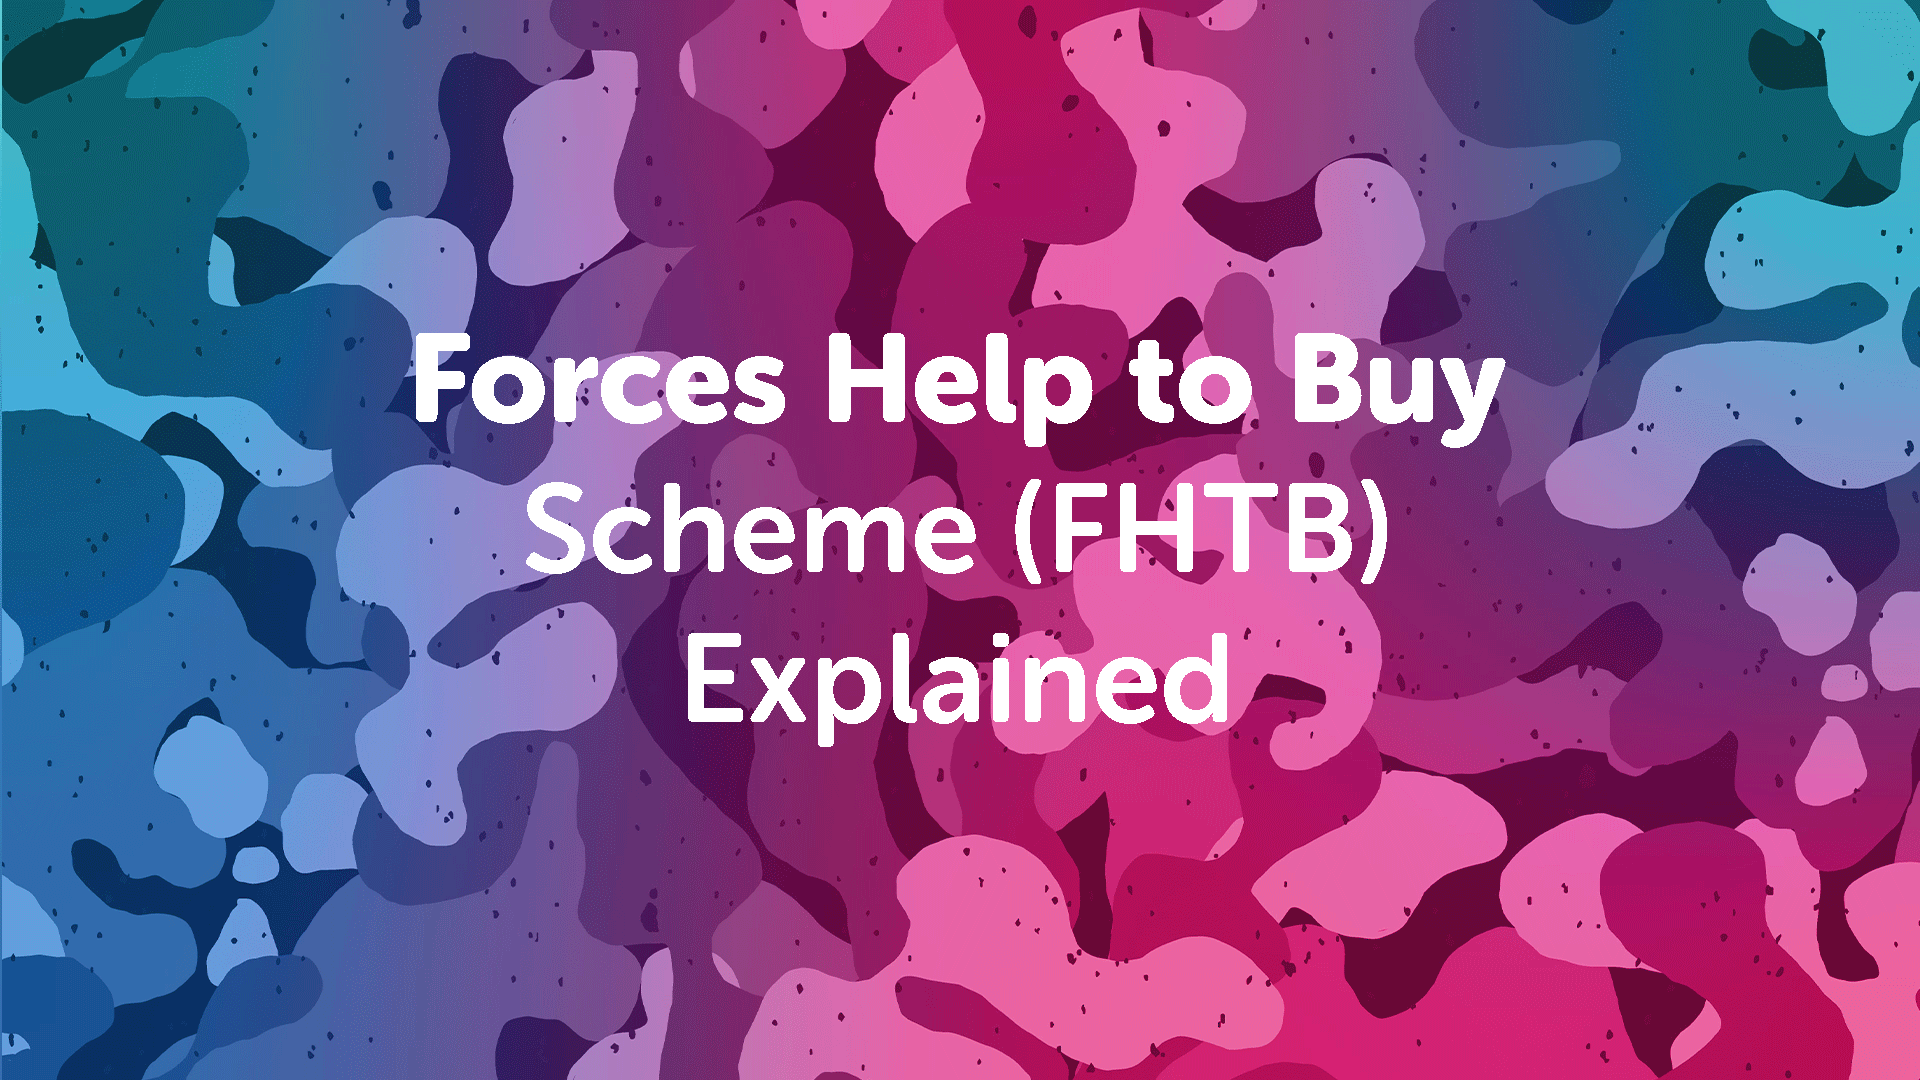 Forces Help to Buy Scheme (FHTB) Explained in London